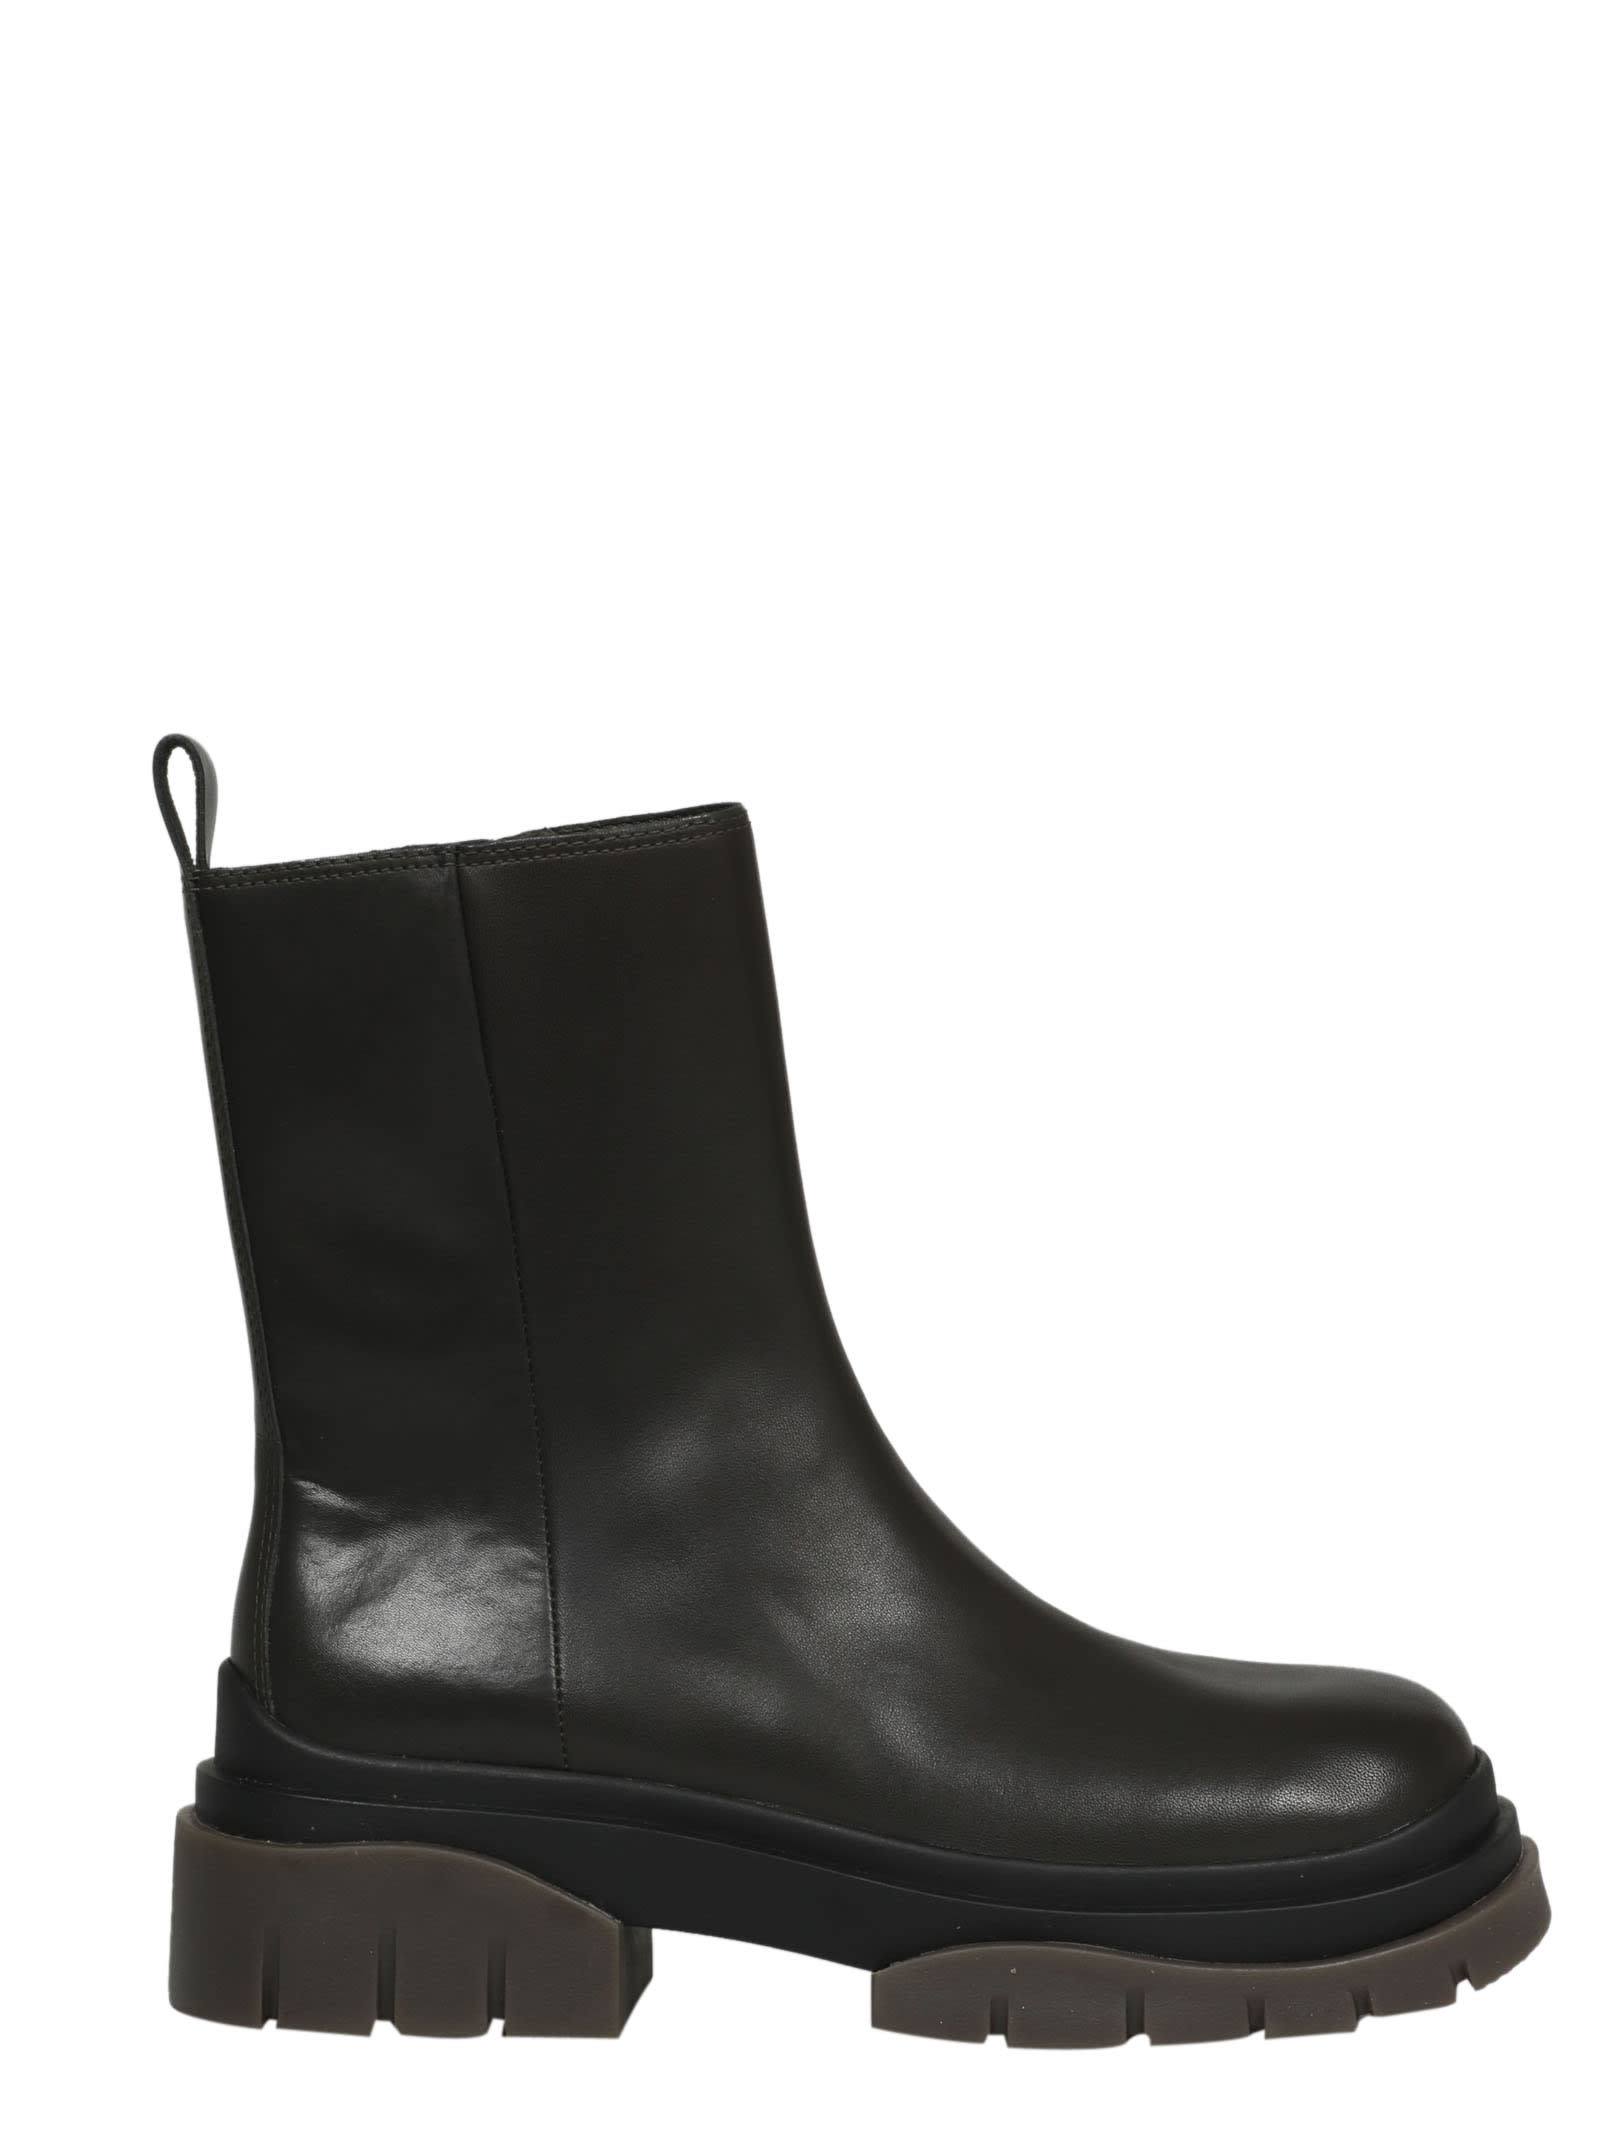 Ash Sting Ankle Boots